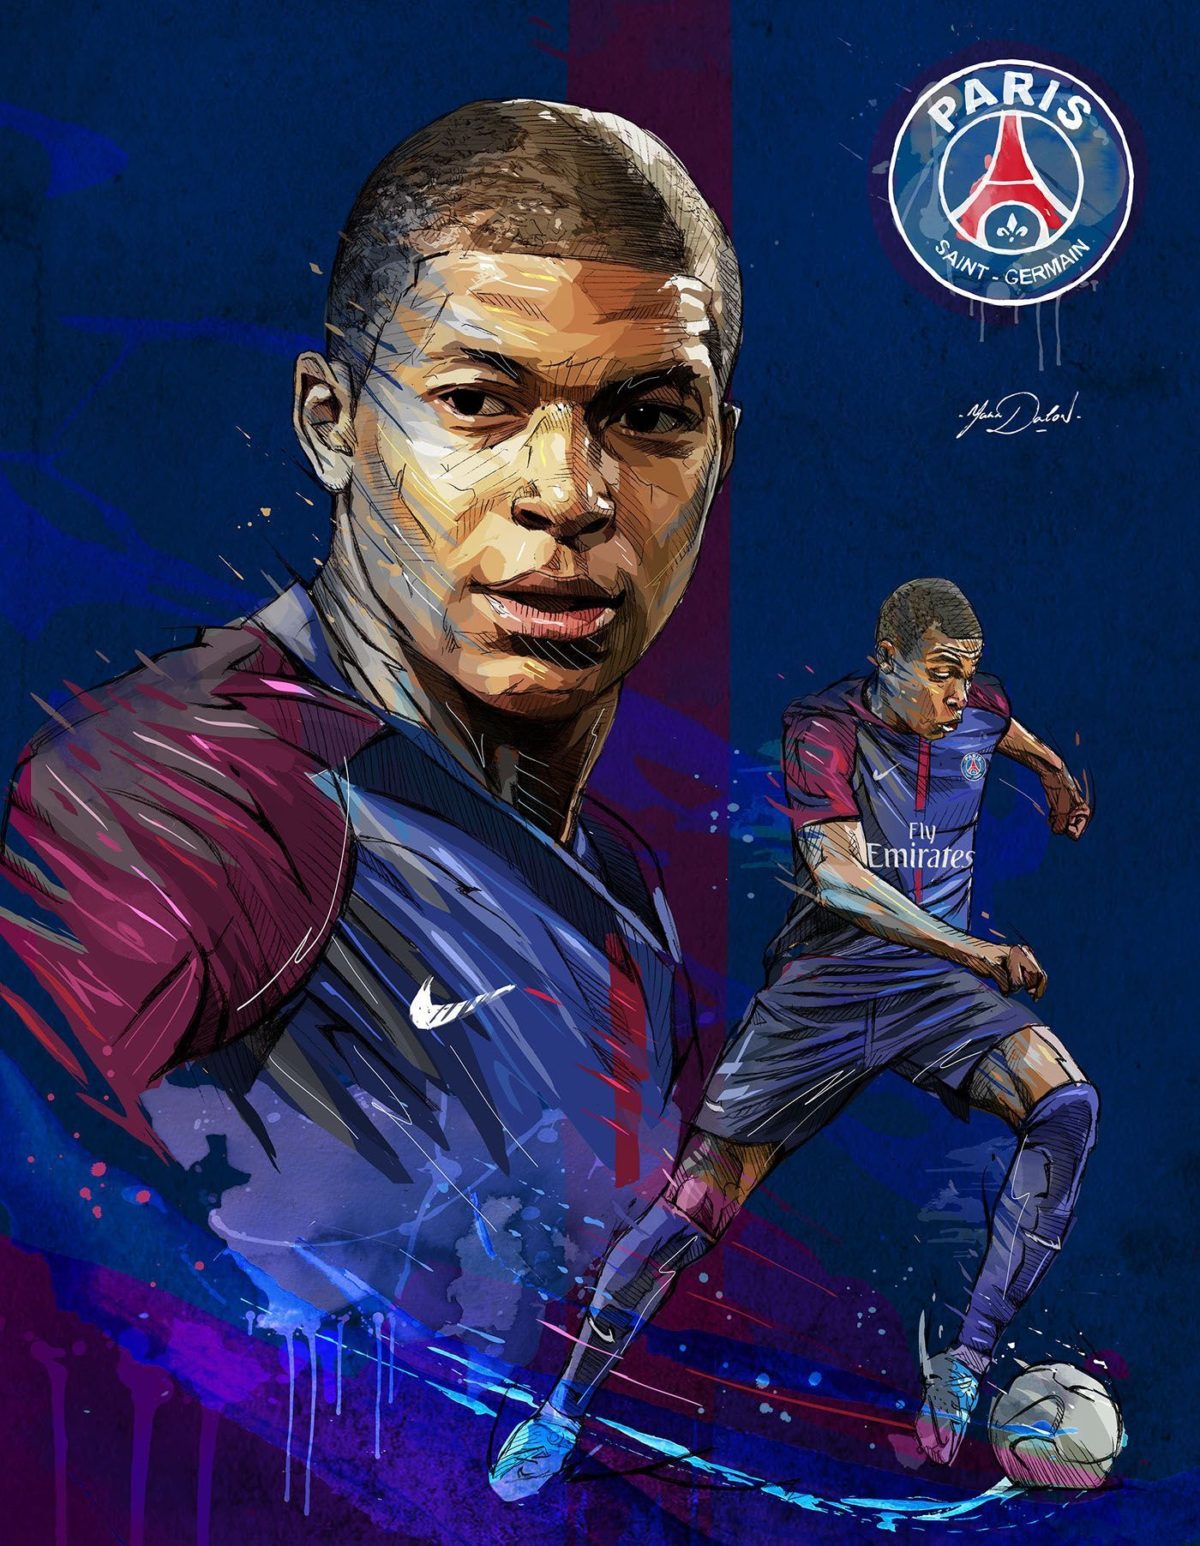 My painting of Kylian Mbappé, young soccer player of the PSG …